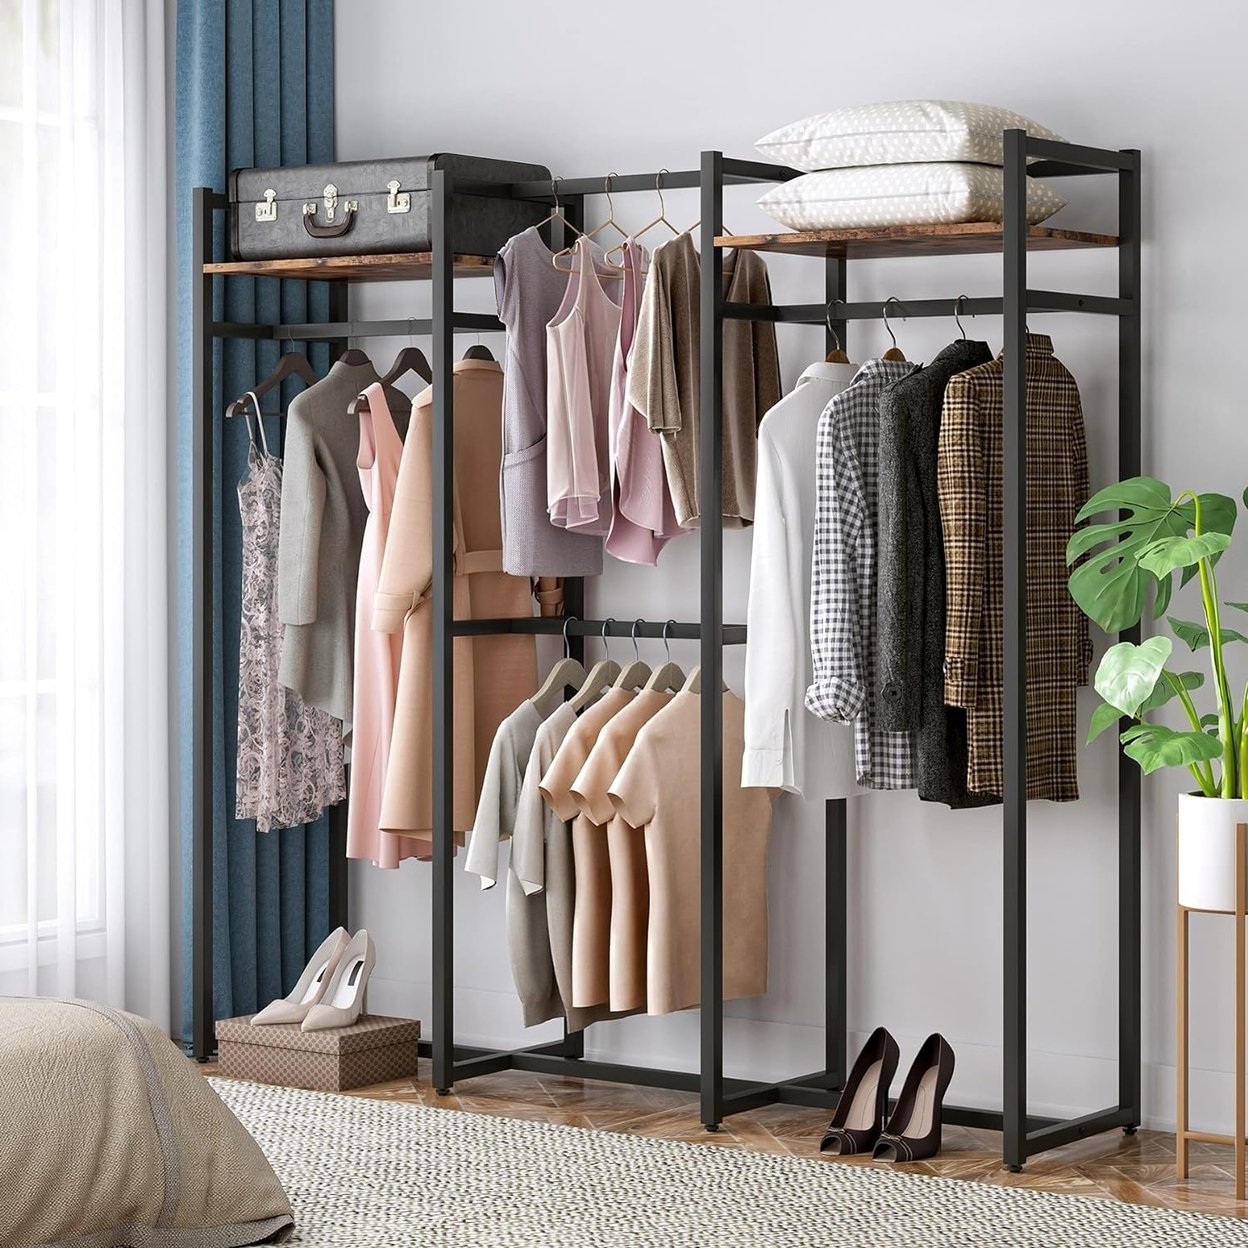 Tribesigns Garment Rack Heavy Duty Clothes Rack, Free Standing Closet Organizer With Shelves And Hanging Rod - Rustic Brown & Black